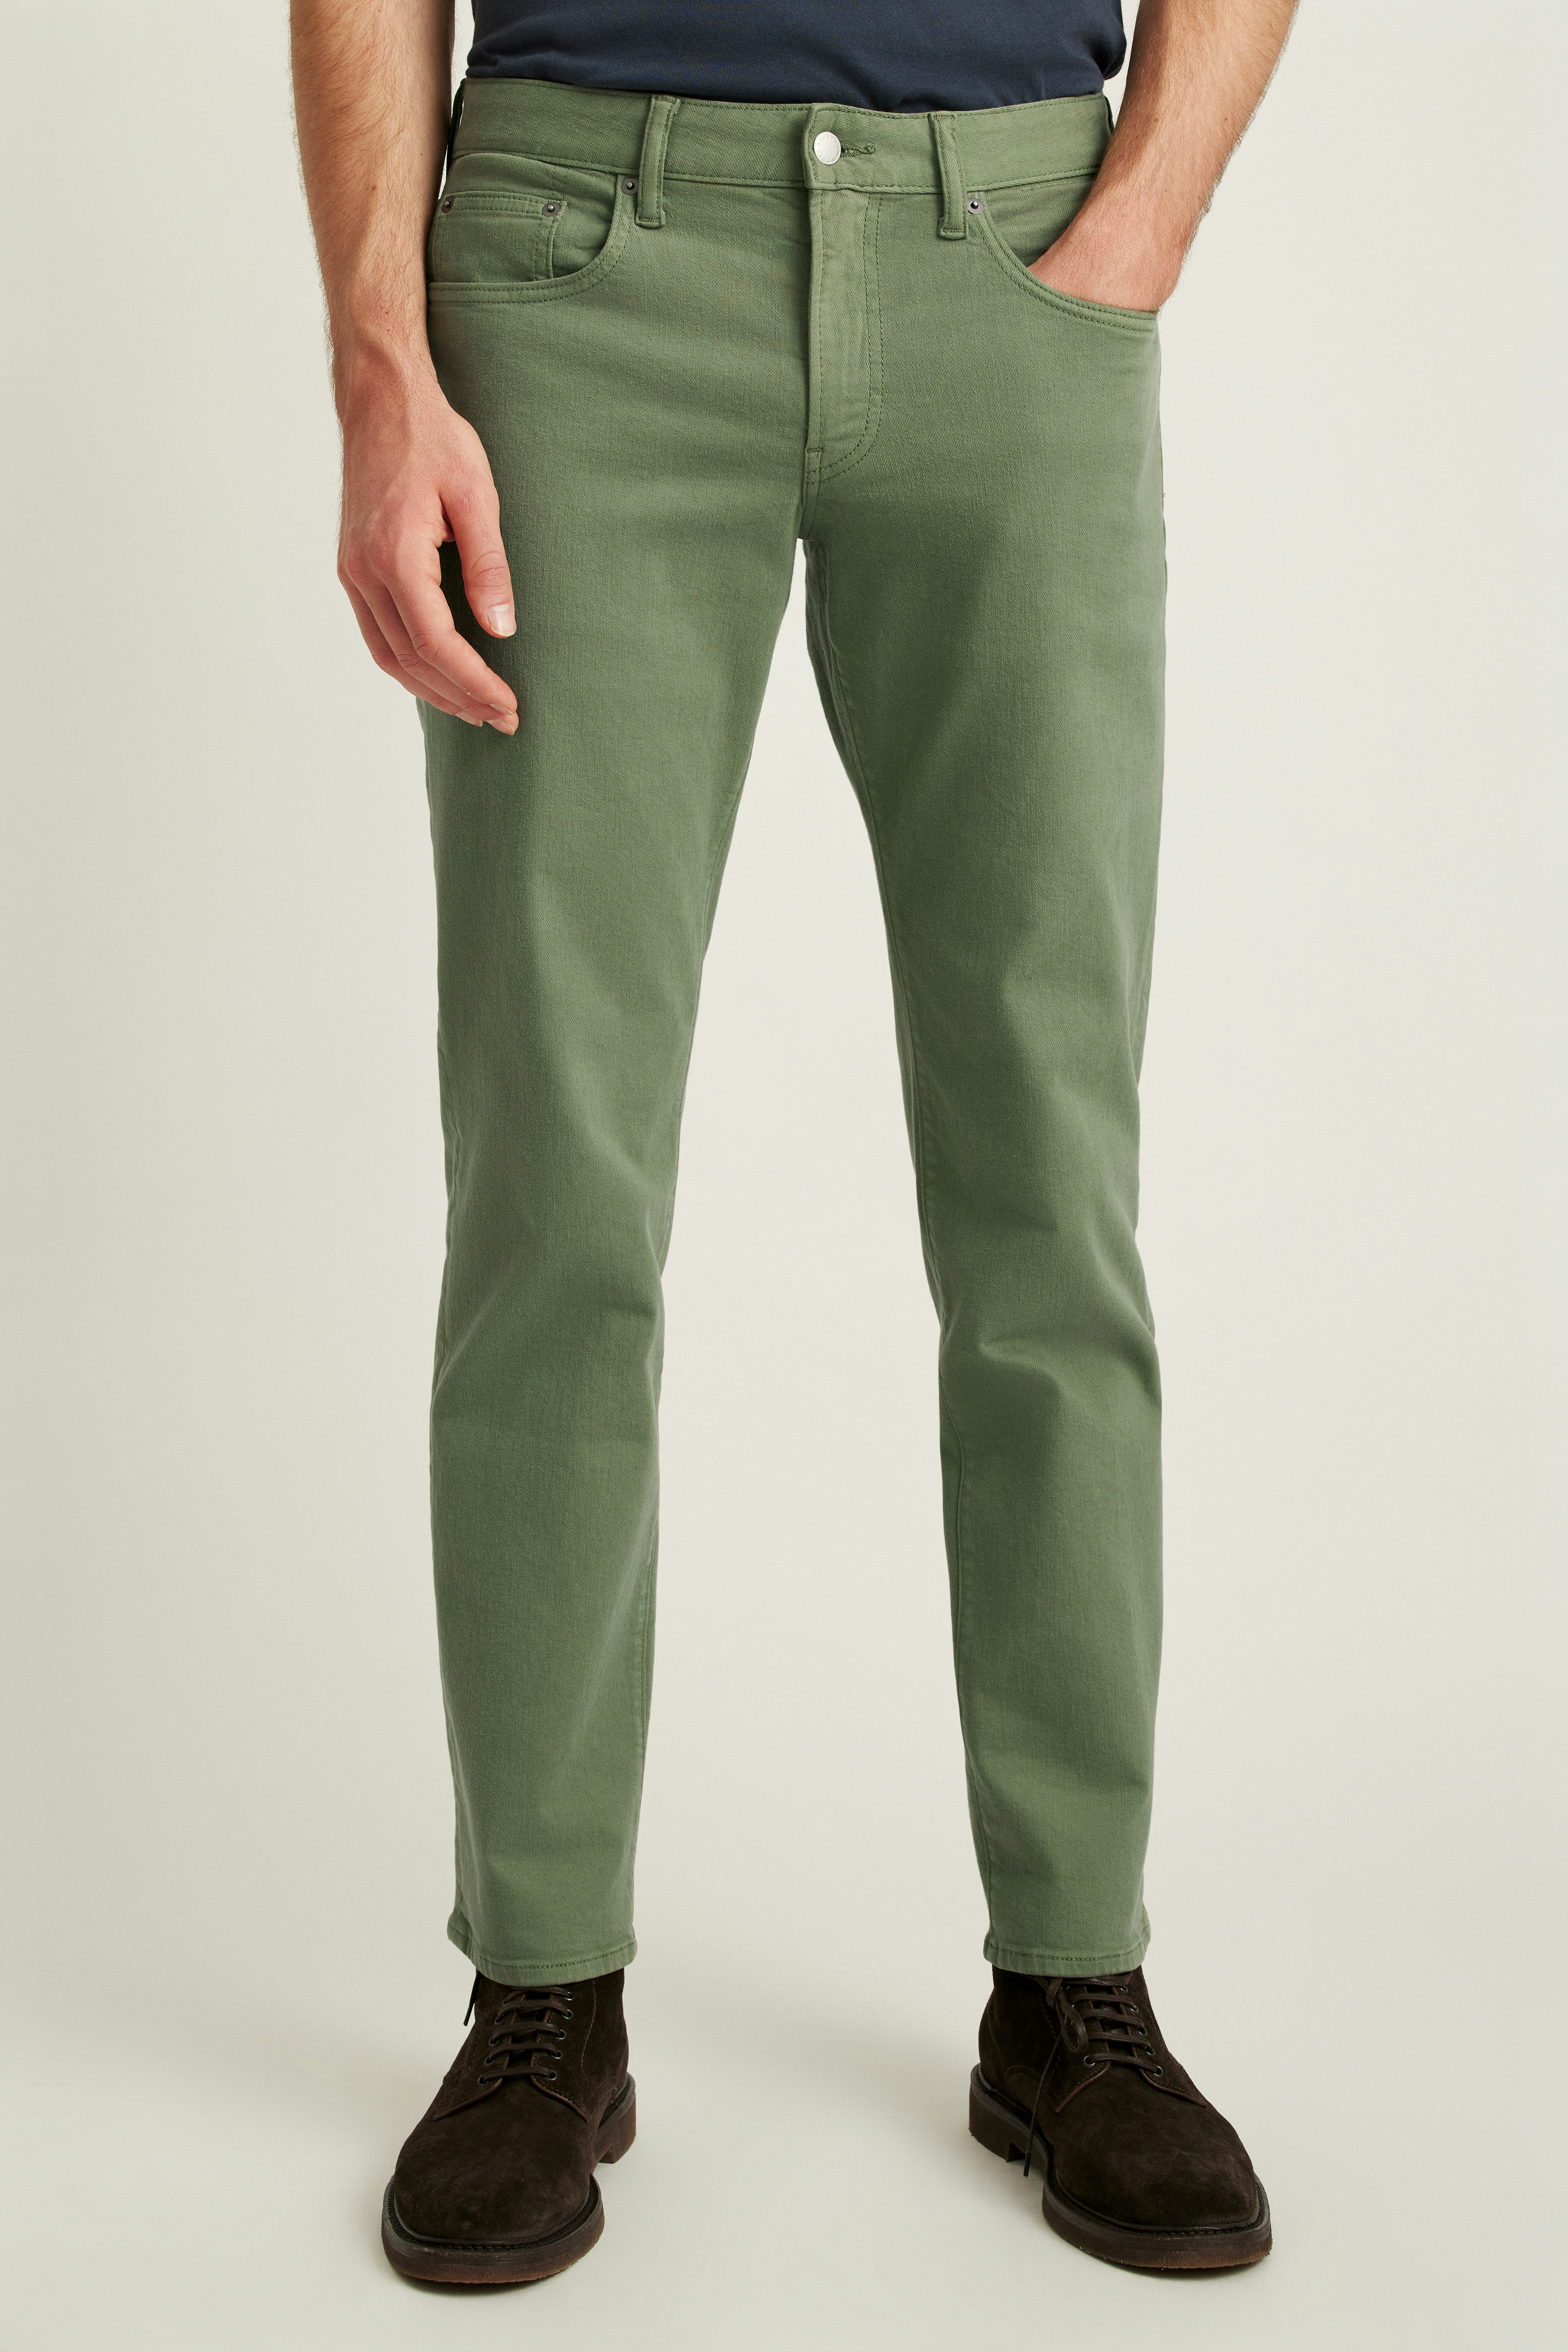 Wear Them Anywhere Style With Bonobos Men's Stretch Jeans